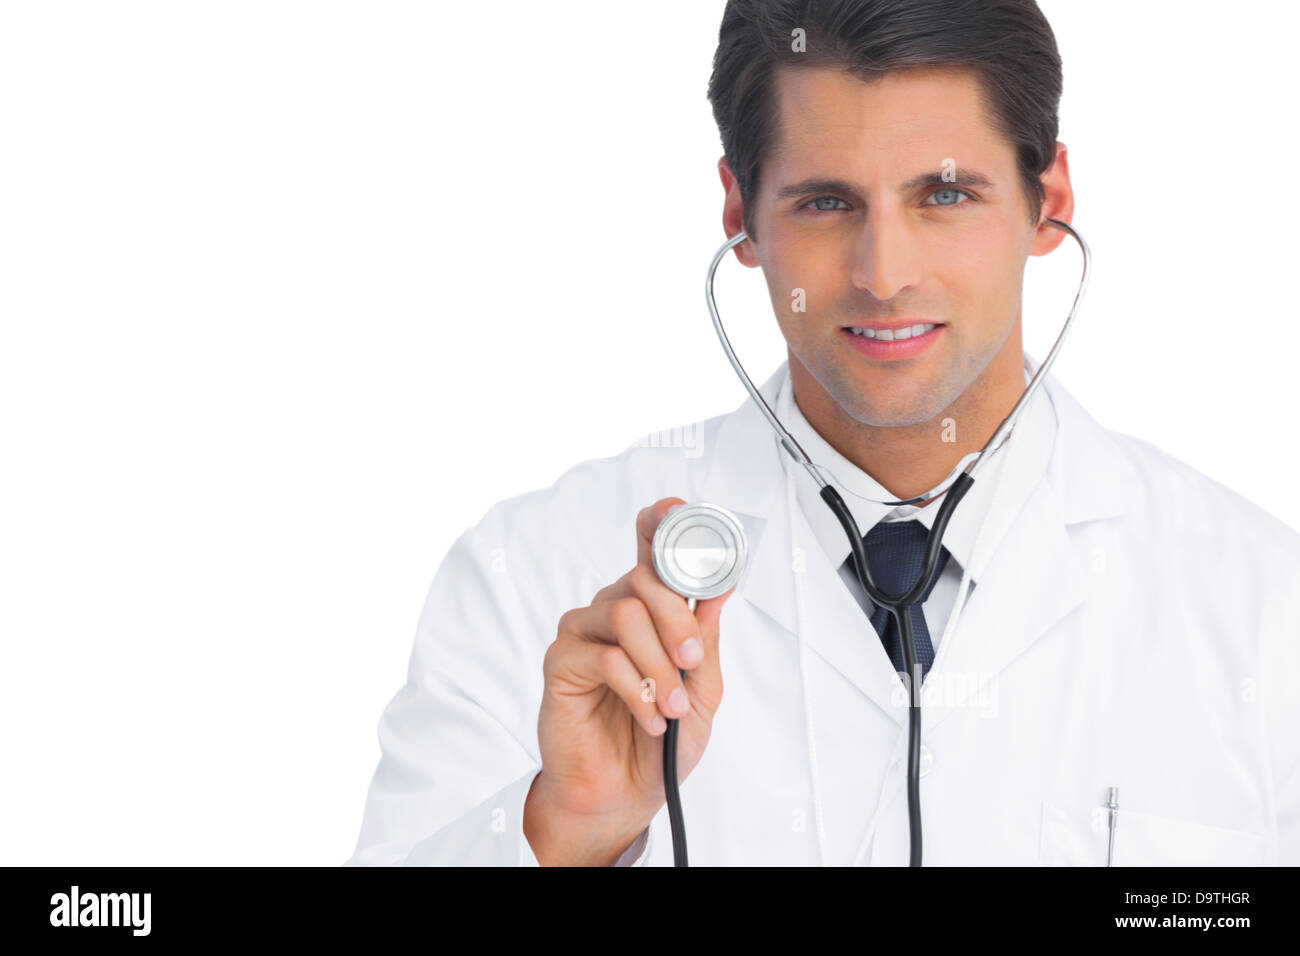 Doctor holding up stethoscope Banque D'Images